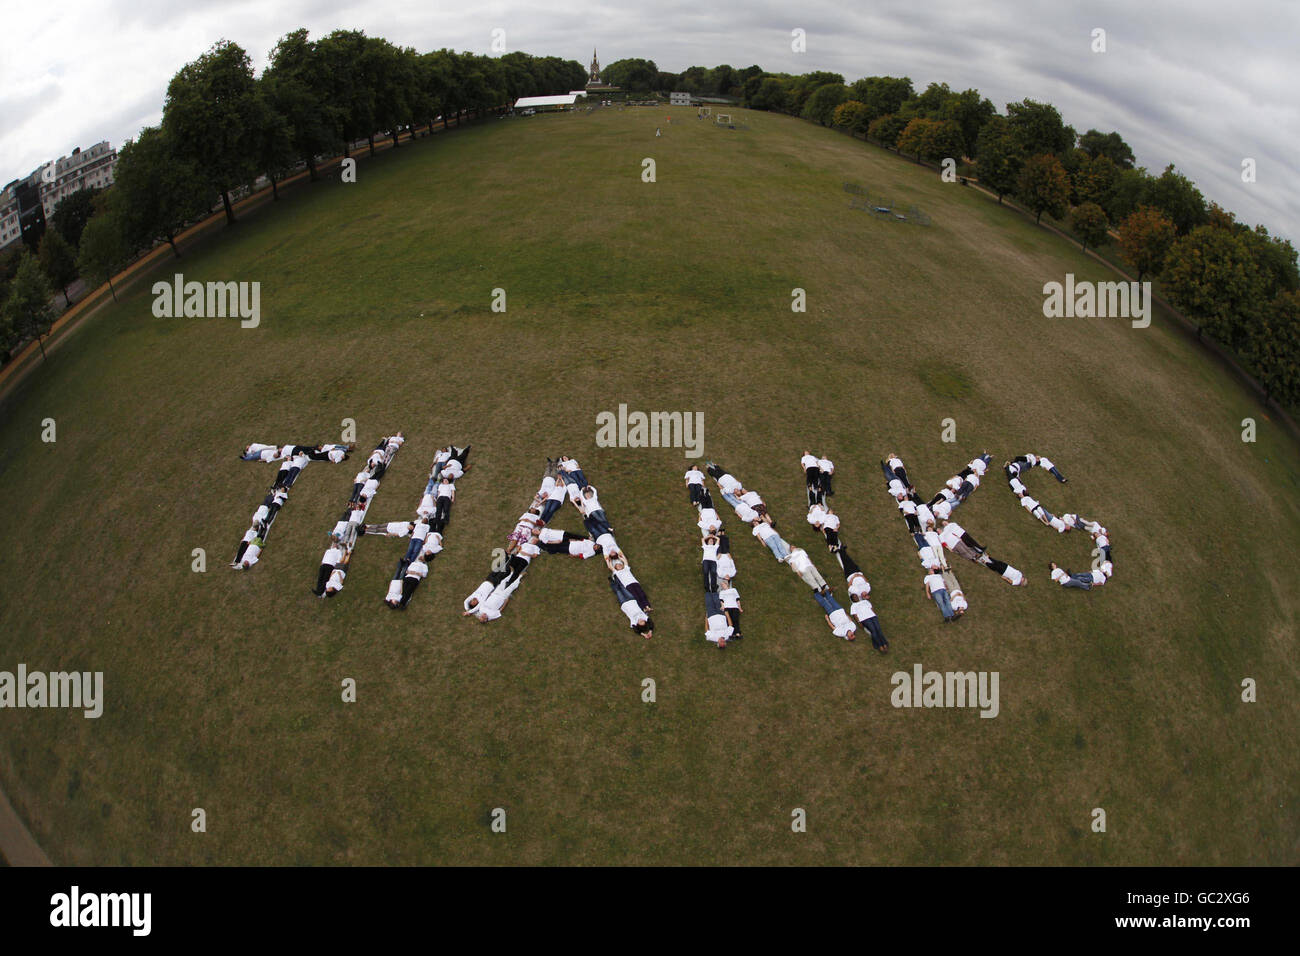 Over 90 people, who have given up smoking, and government advisors who helped them, say 'Thanks' in Hyde Park, London, to celebrate the 10th anniversary of the NHS stop smoking service. Stock Photo